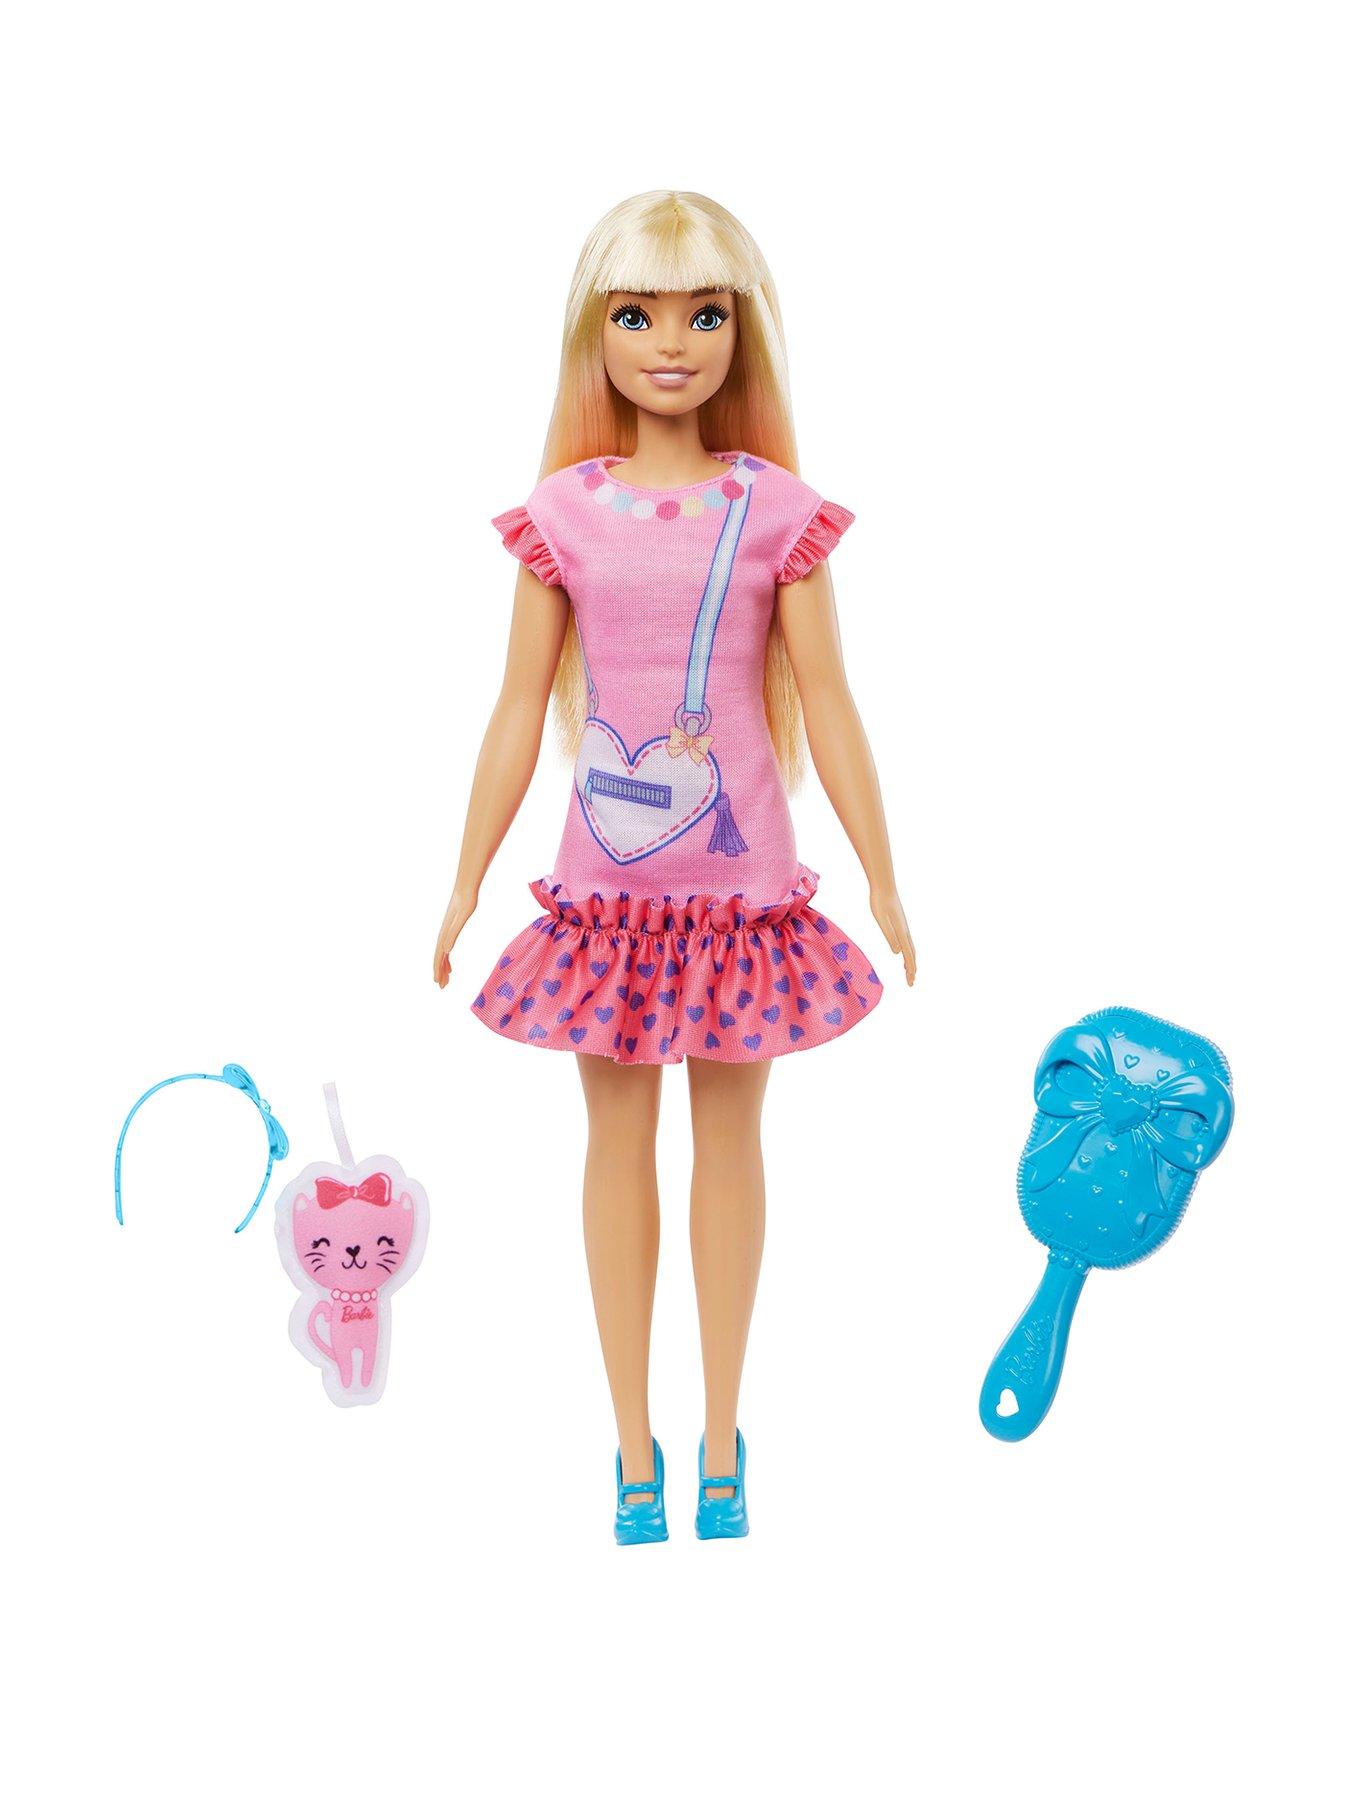 Barbie Dreamtopia Dress Up Doll Gift Set, 12.5-Inch, Blonde with